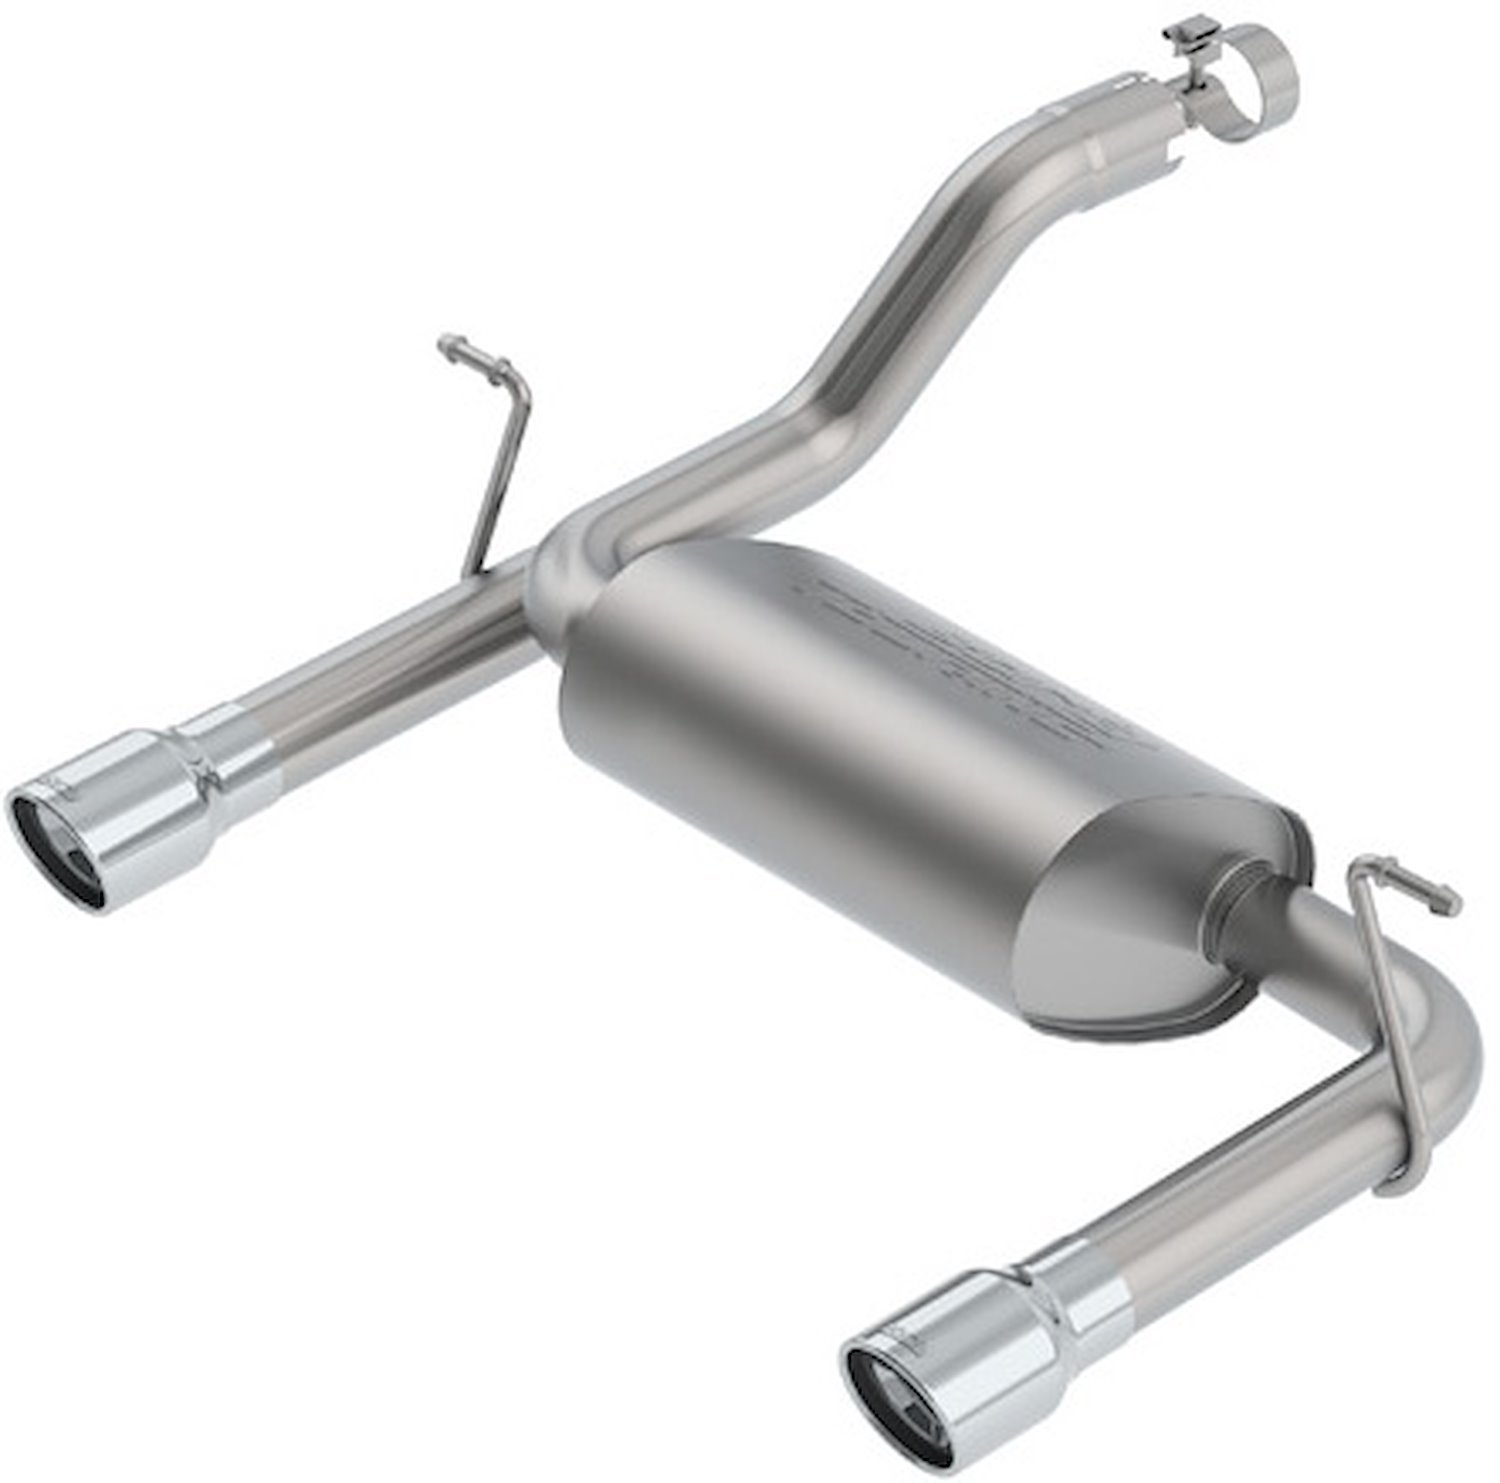 Axle-Back Exhaust System With Touring Muffler for 2018 Jeep Wrangler JL/JLU 3.6L V6 - Polished Tips